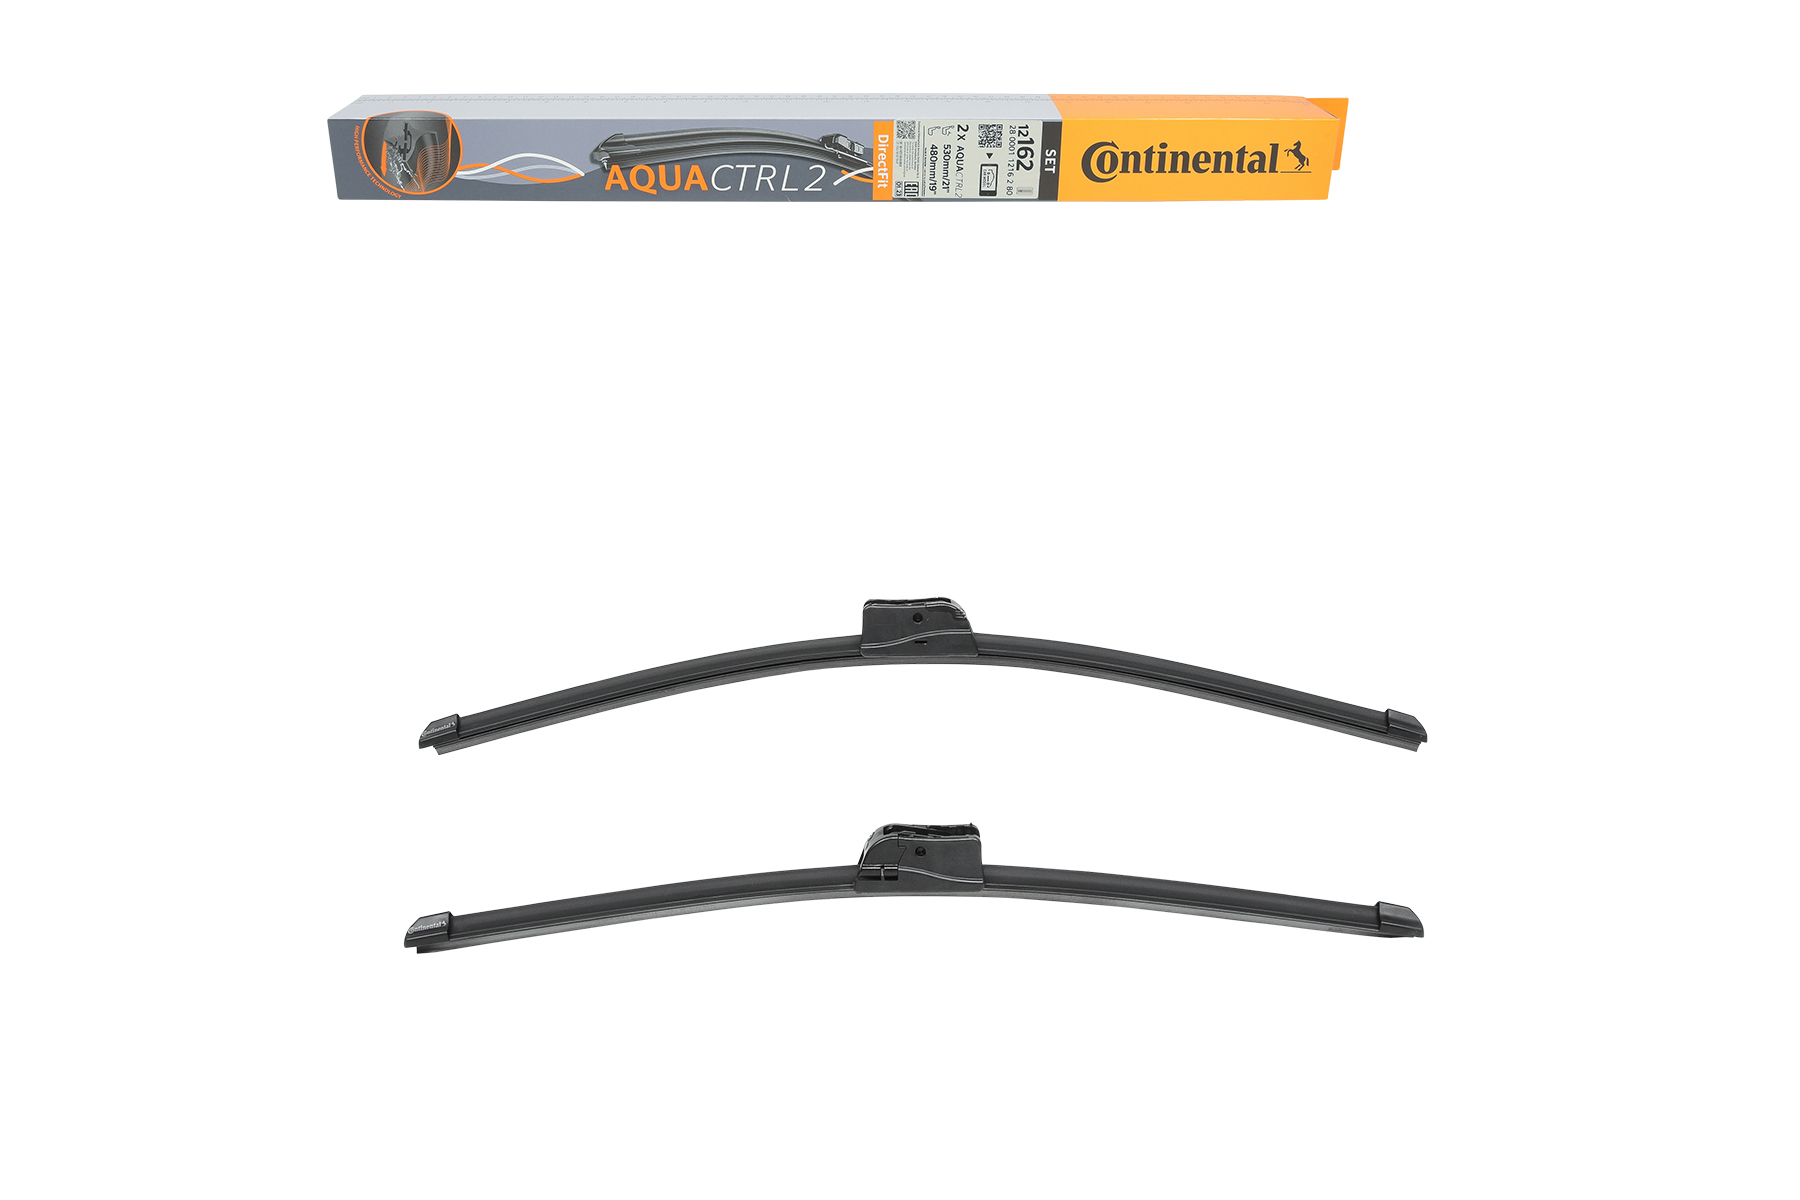 12162 Continental AQUACTRL2 530, 480 mm Front, Flat wiper blade, with spoiler, 21/19 Inch Styling: with spoiler Wiper blades 2800011216280 buy